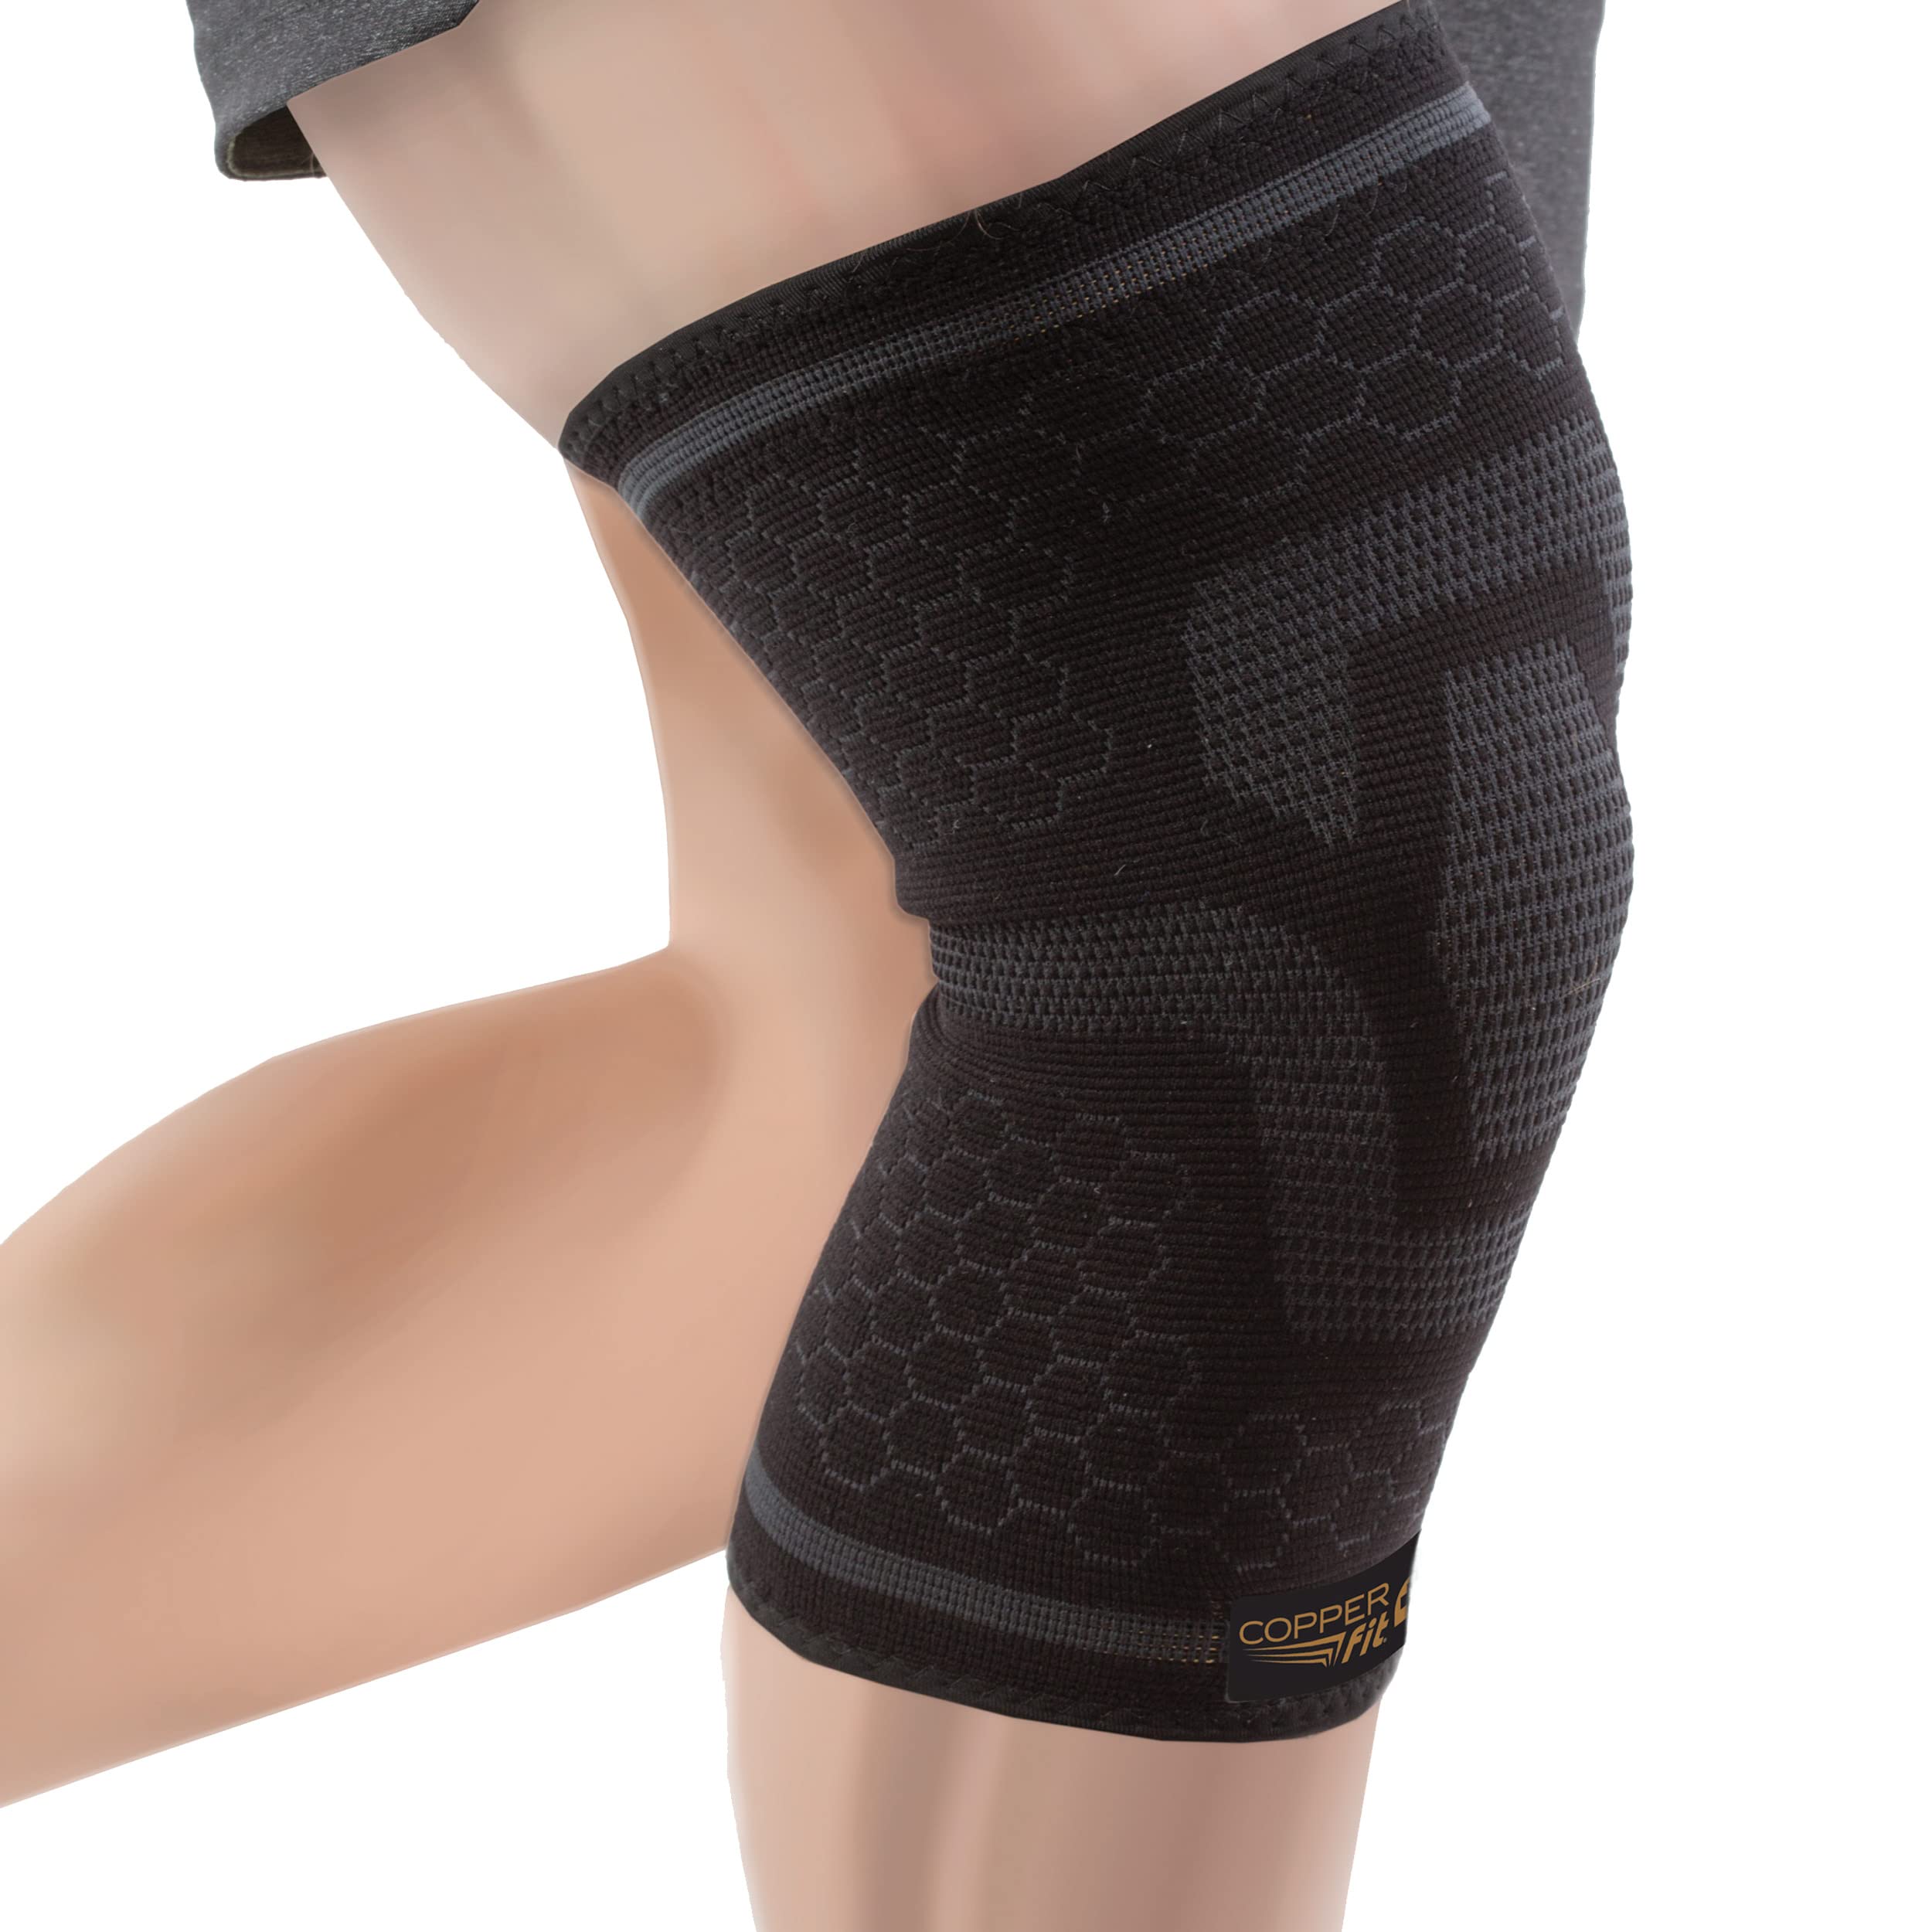 Copper Fit ICE Knee Compression Sleeve Infused with Menthol